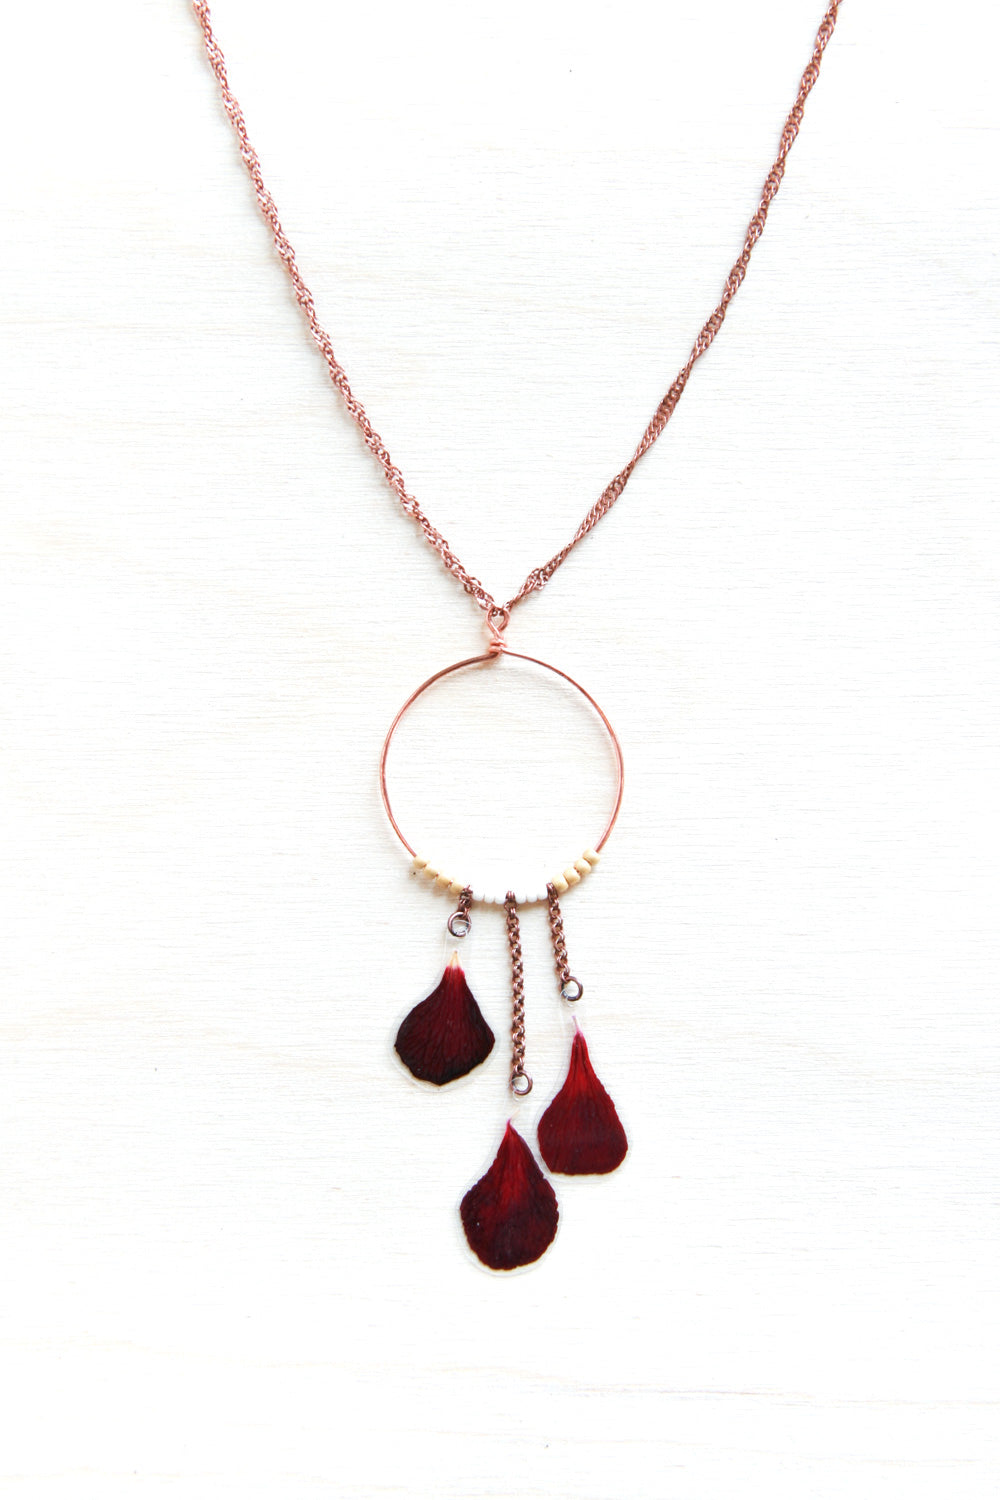 Red Geranium Flower Necklace with Copper Hoop & Gold Beads